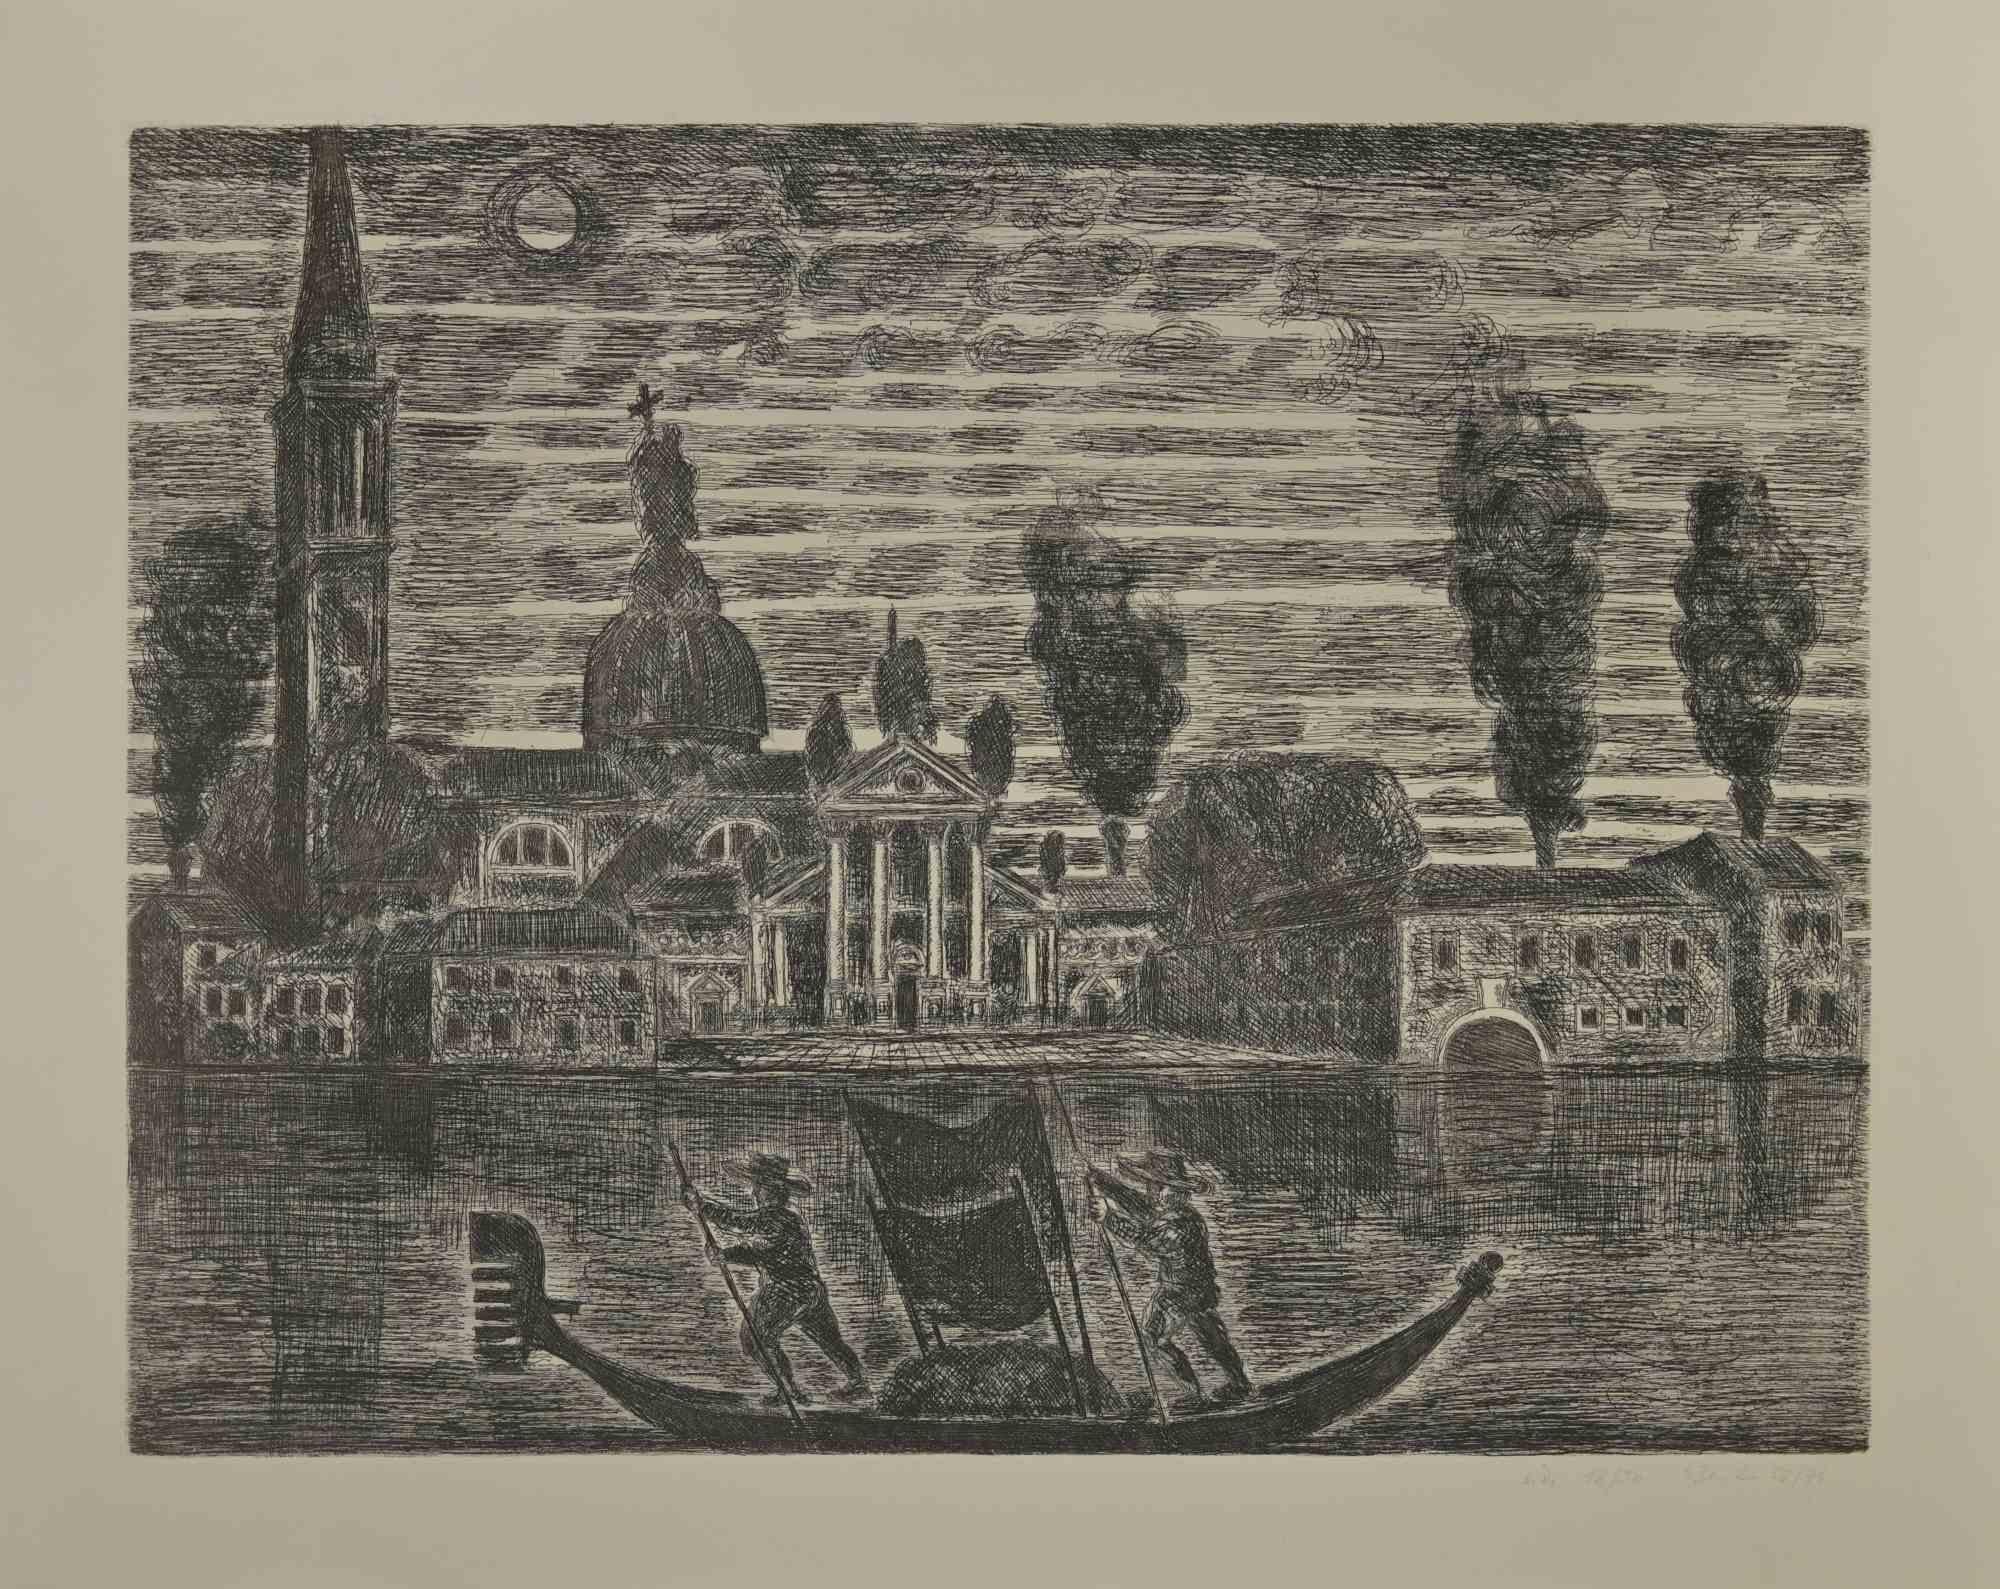 Gondoliers in Venice is an etching realized by Gianpaolo Berto in 1974.

60 X 75 cm , no frame.

Edition 18/50. Numbered and firmed by the artist in the lower margin.

Good conditions.

 

Gianpaolo Berto (1940) was born and raised in the